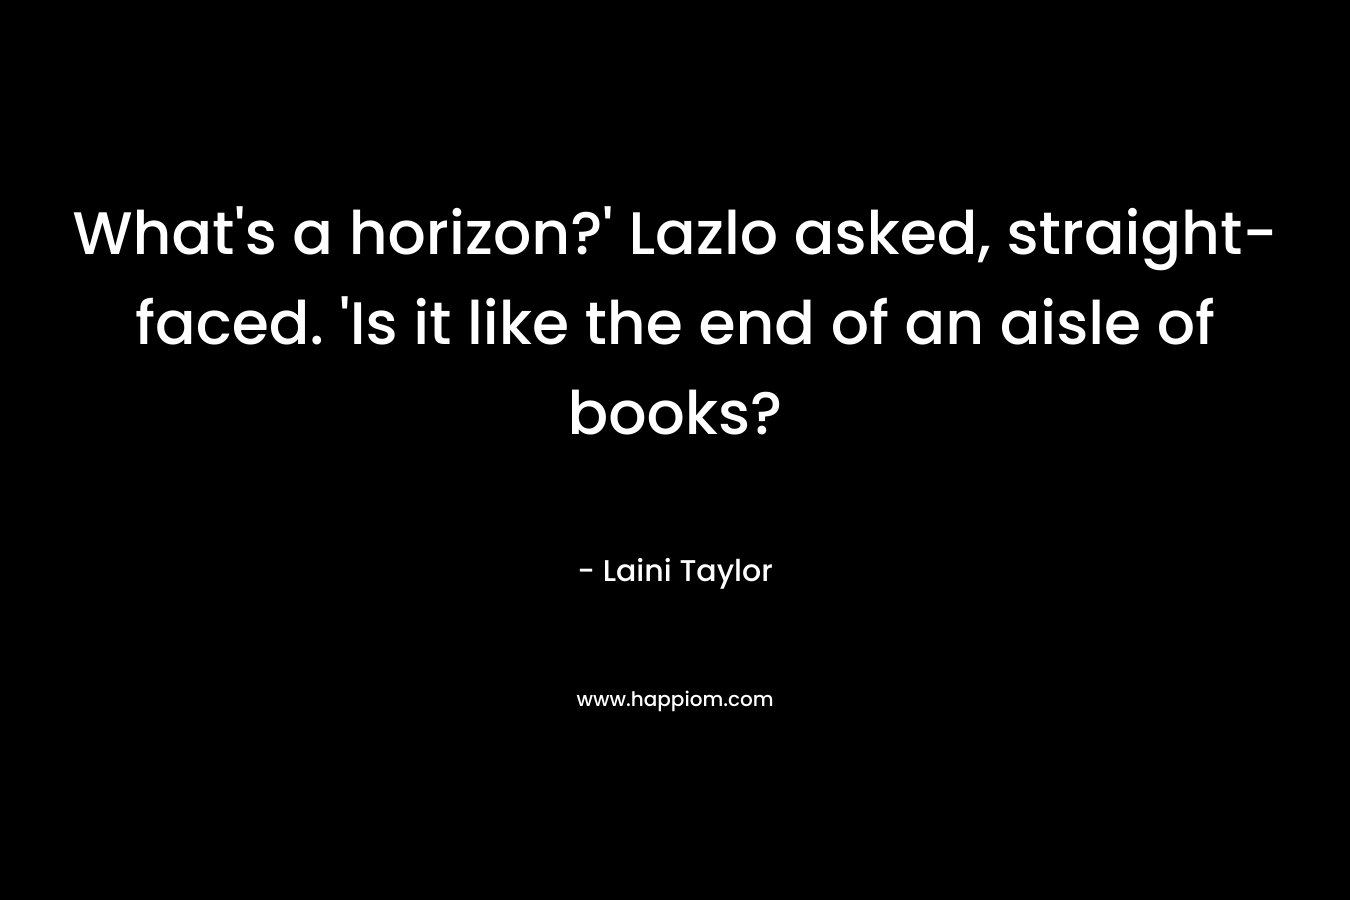 What's a horizon?' Lazlo asked, straight-faced. 'Is it like the end of an aisle of books?